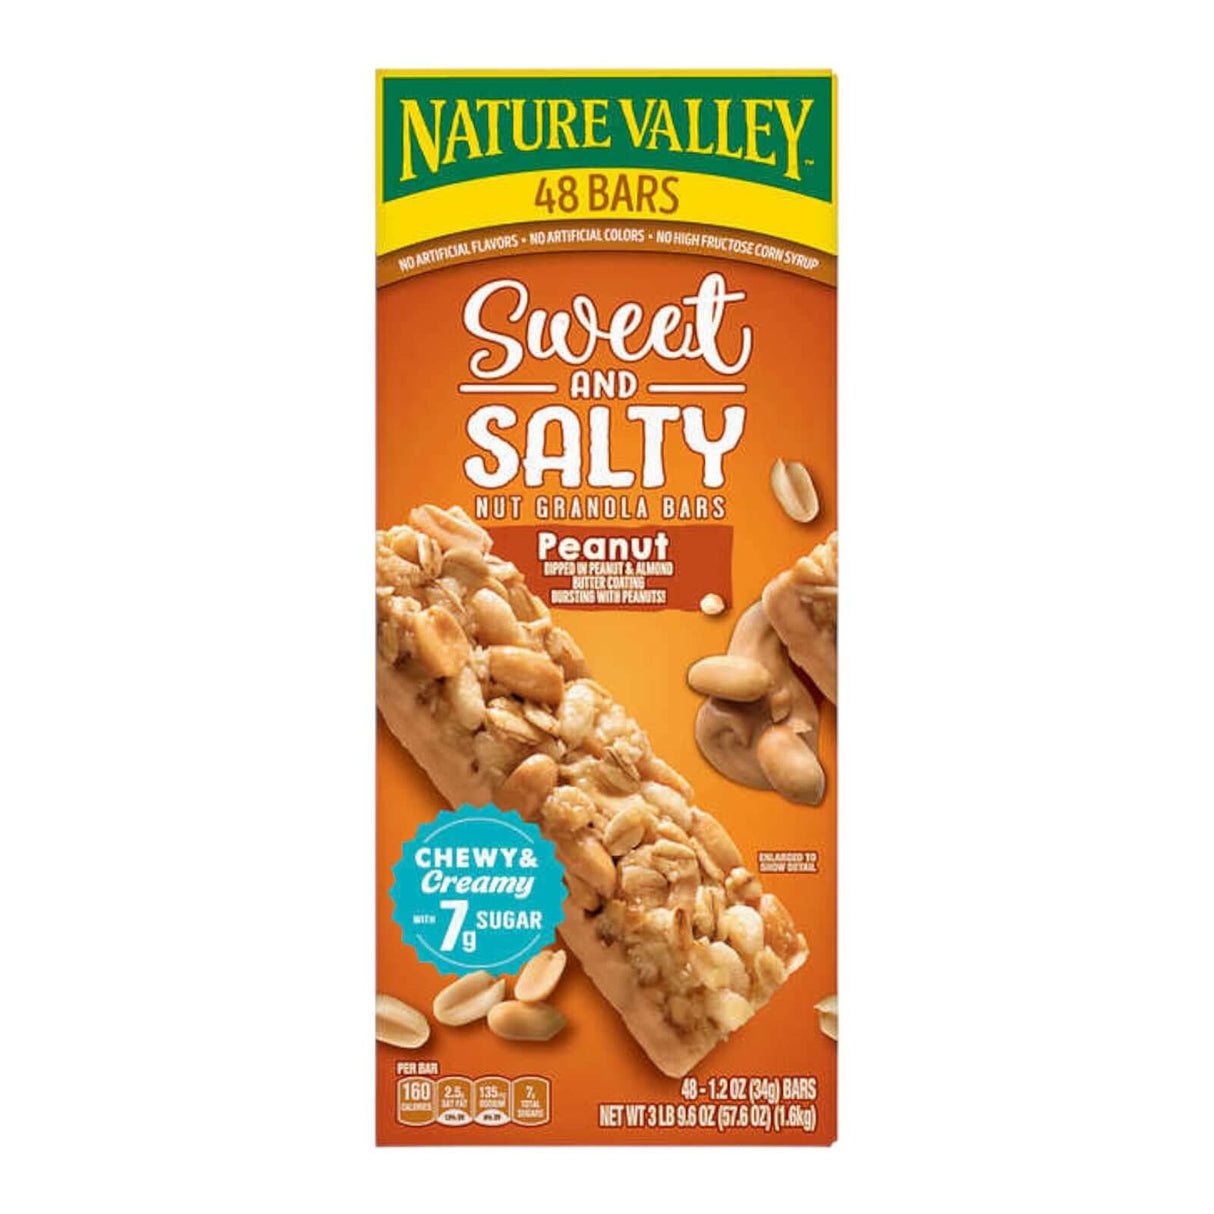 Nature Valley Sweet and Salty Peanut Bars